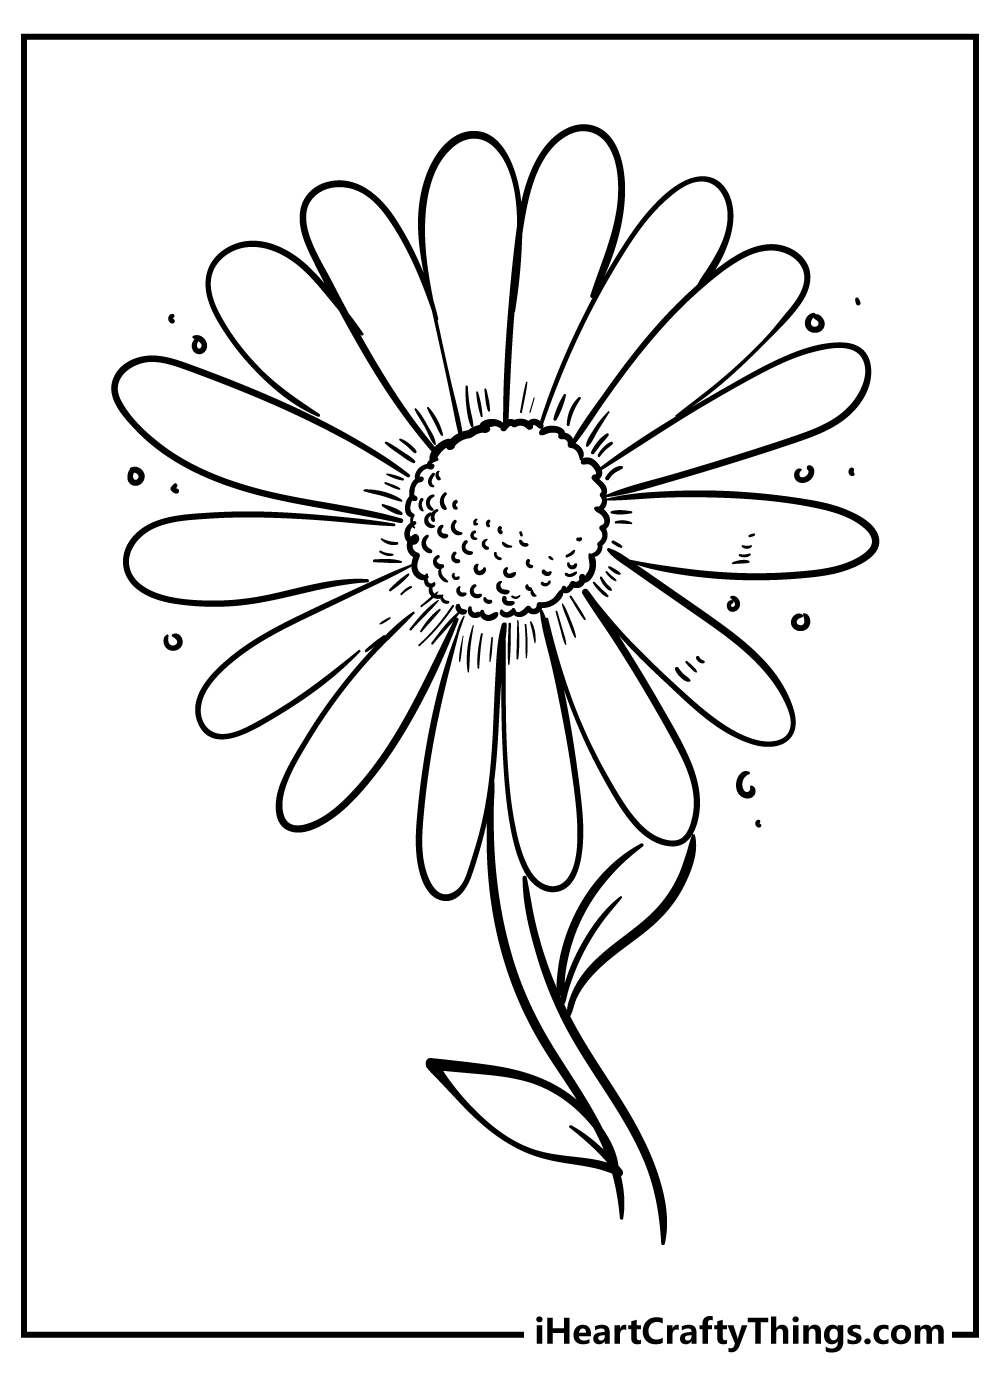 Daisy Coloring Original Sheet for children free download